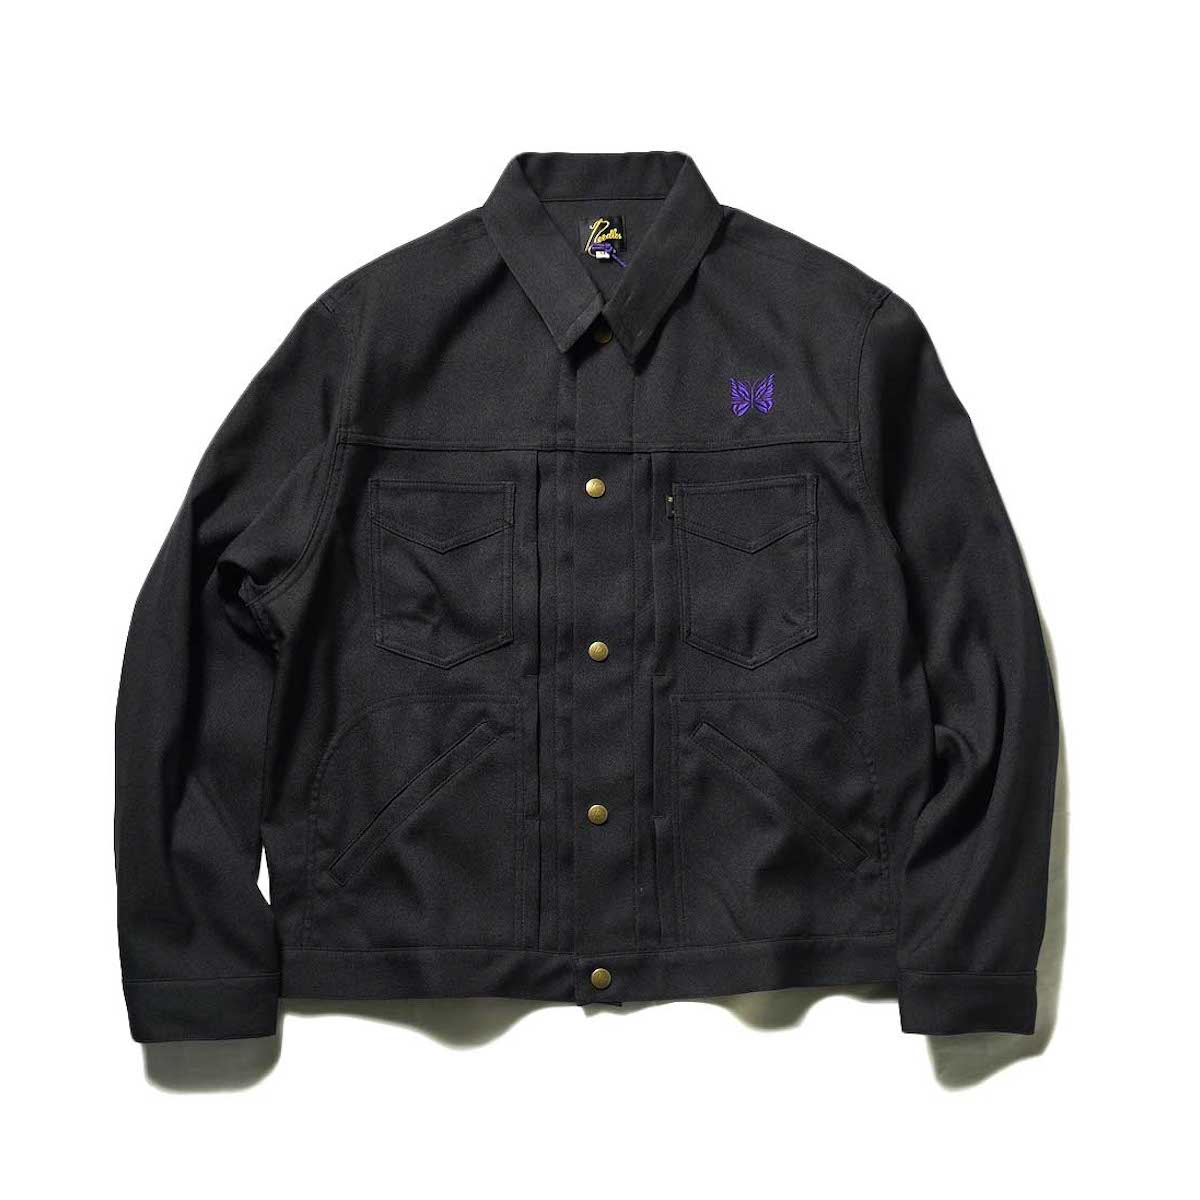 Needles / PENNY JEAN JACKET - POLY TWILL (Black)正面